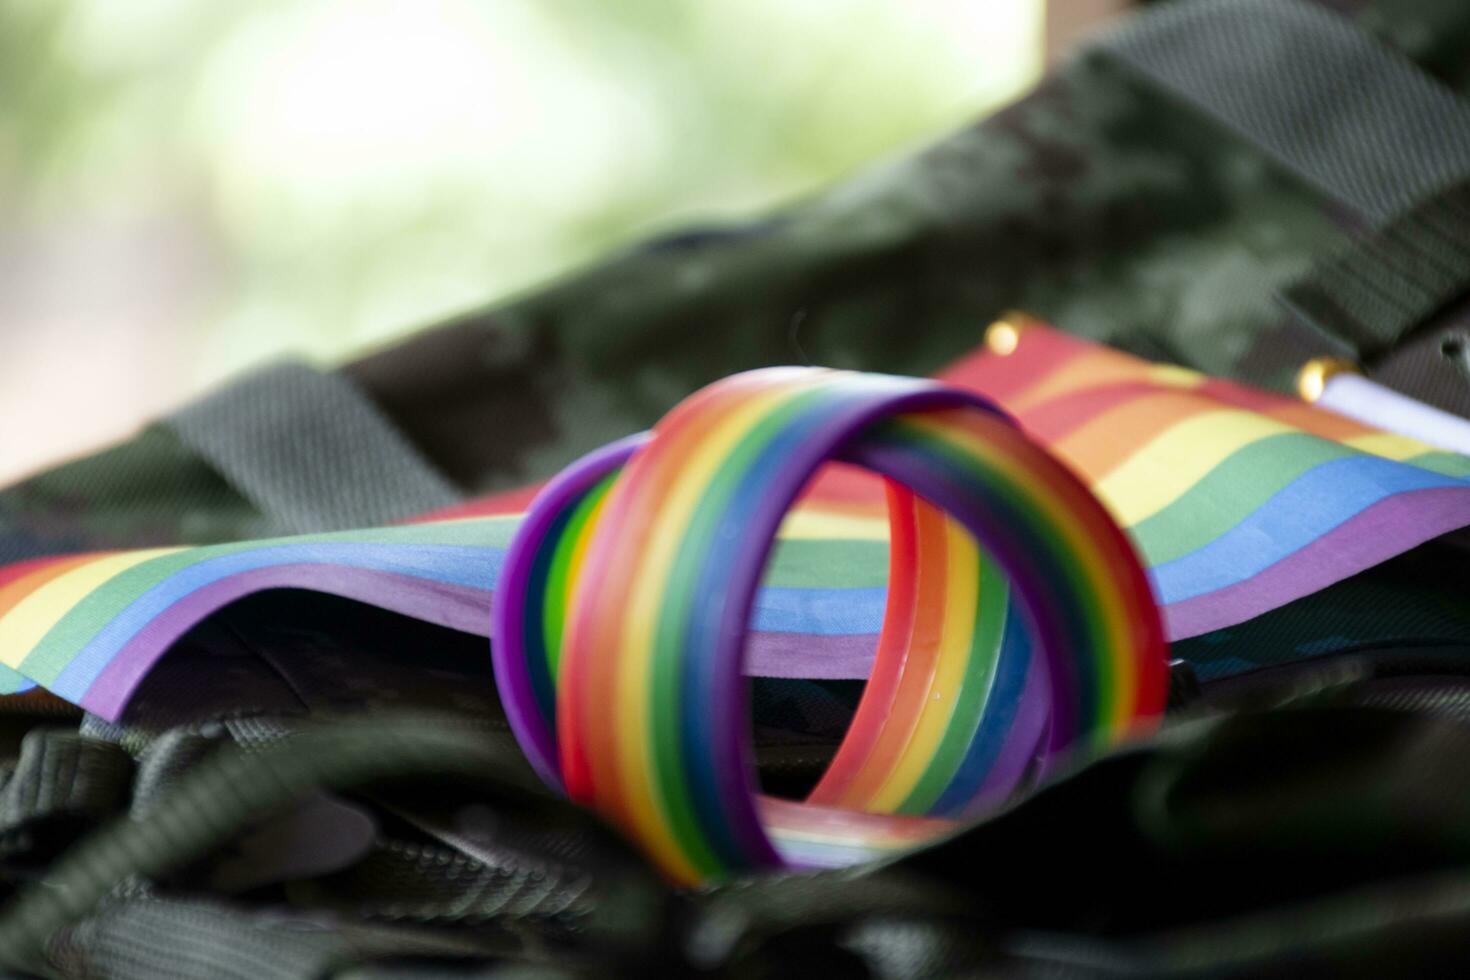 Rainbow flag and rainbow wristbands on camouflage background, concept for celebrations of LGBT people in pride month around the world, soft and selective focus on wristband. photo